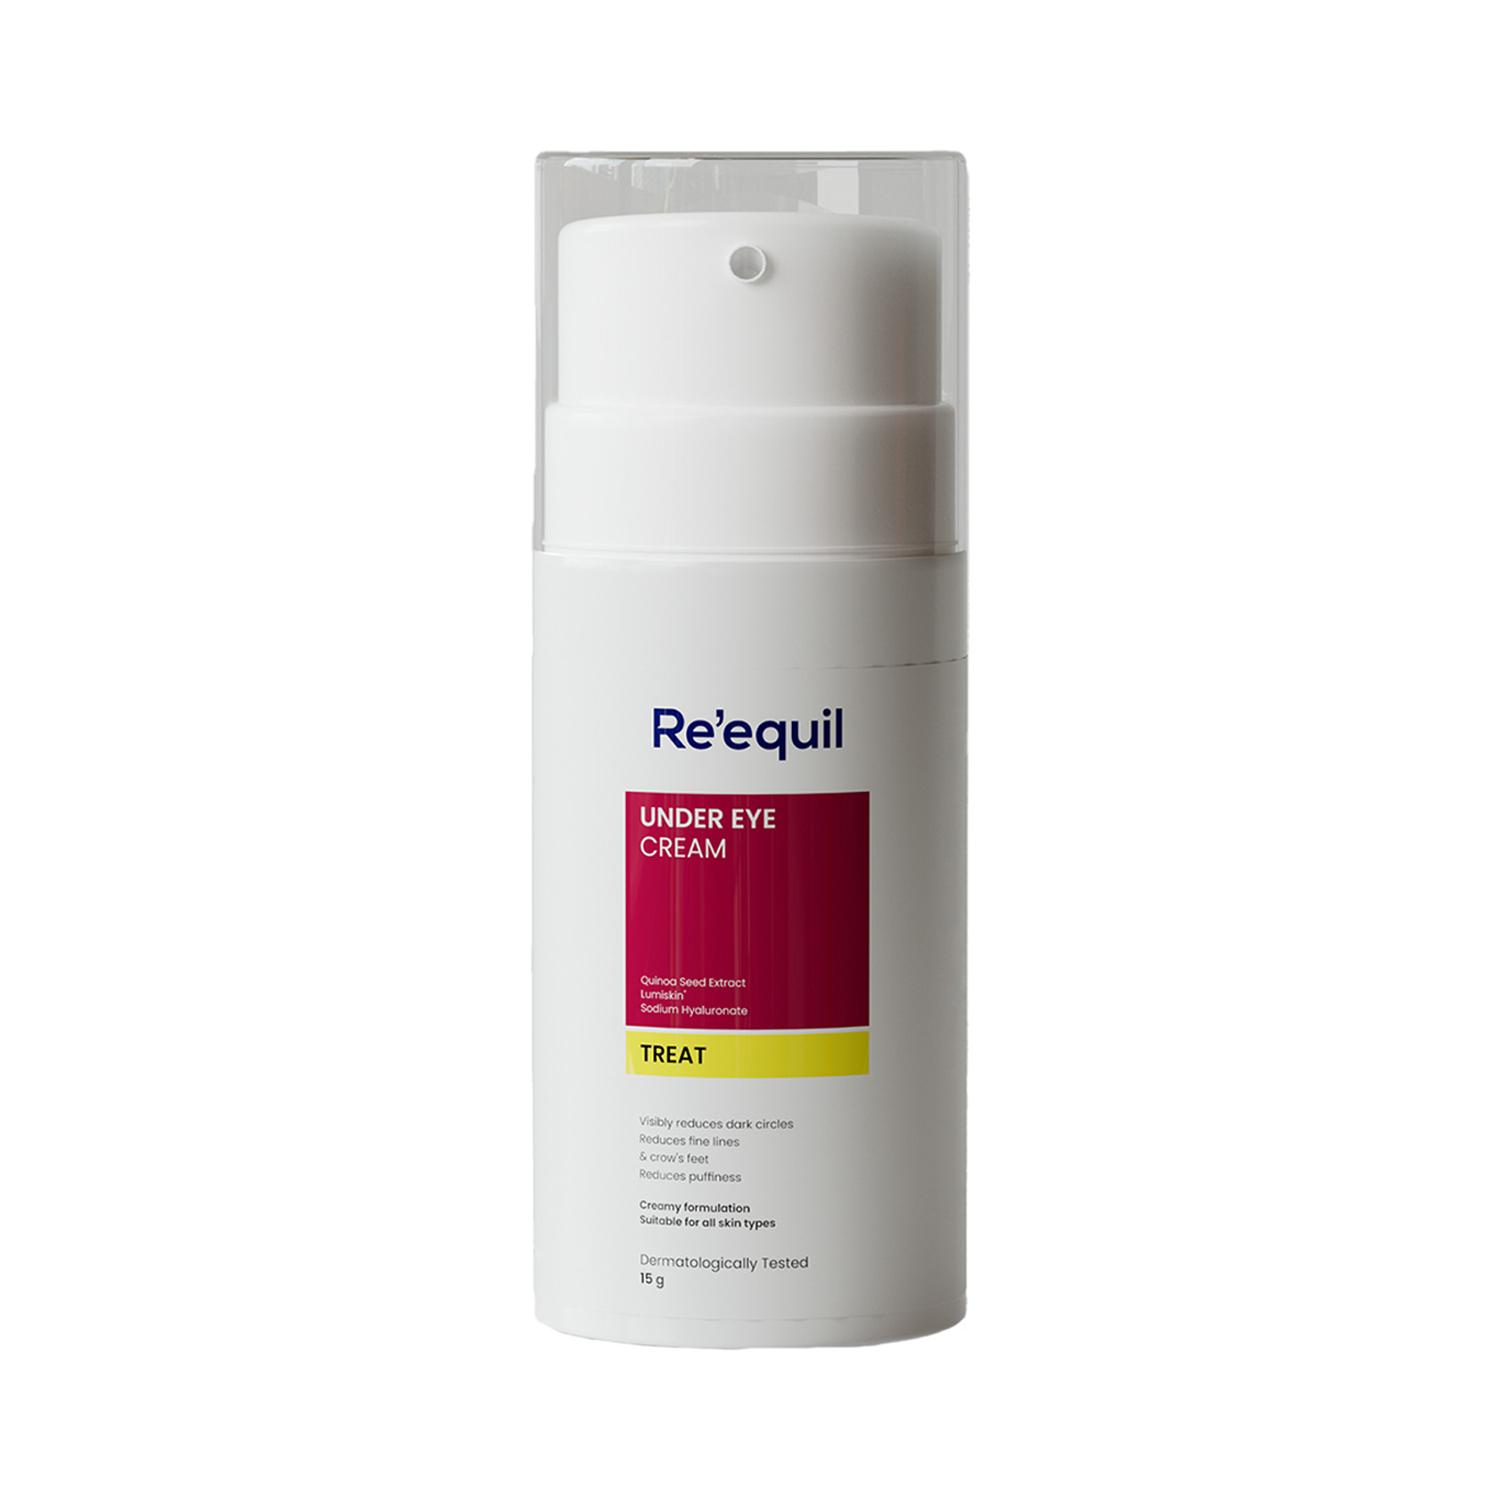 Re'equil Under Eye Cream Fades Dark Circles and Crow's Feet For Unisex For All Skin Types